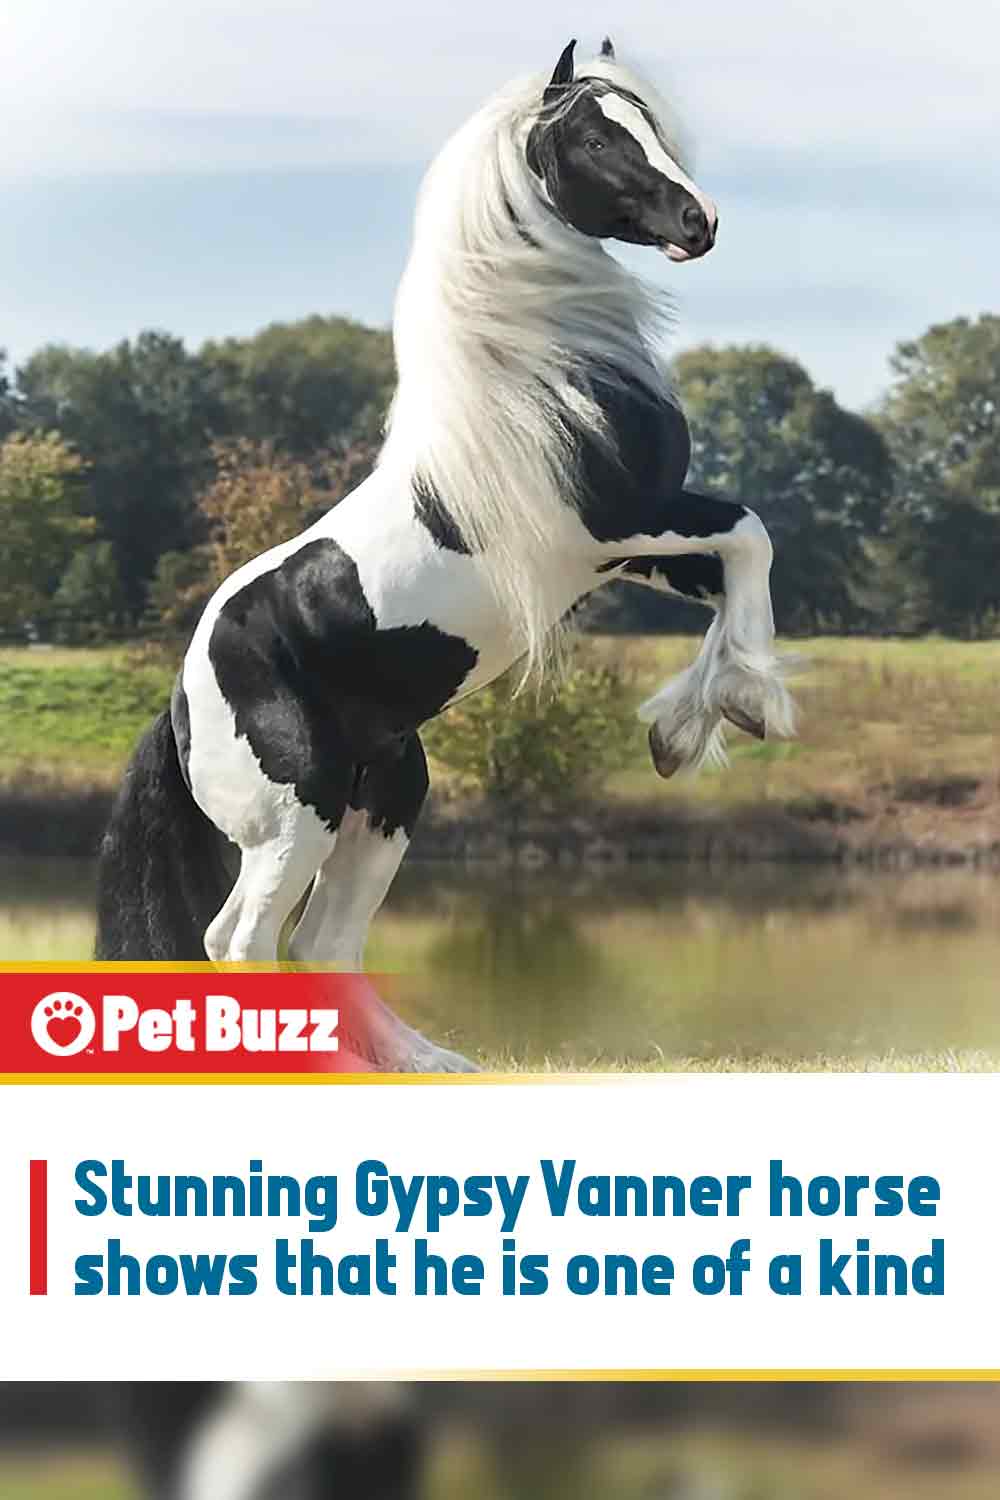 Stunning Gypsy Vanner horse shows that he is one of a kind